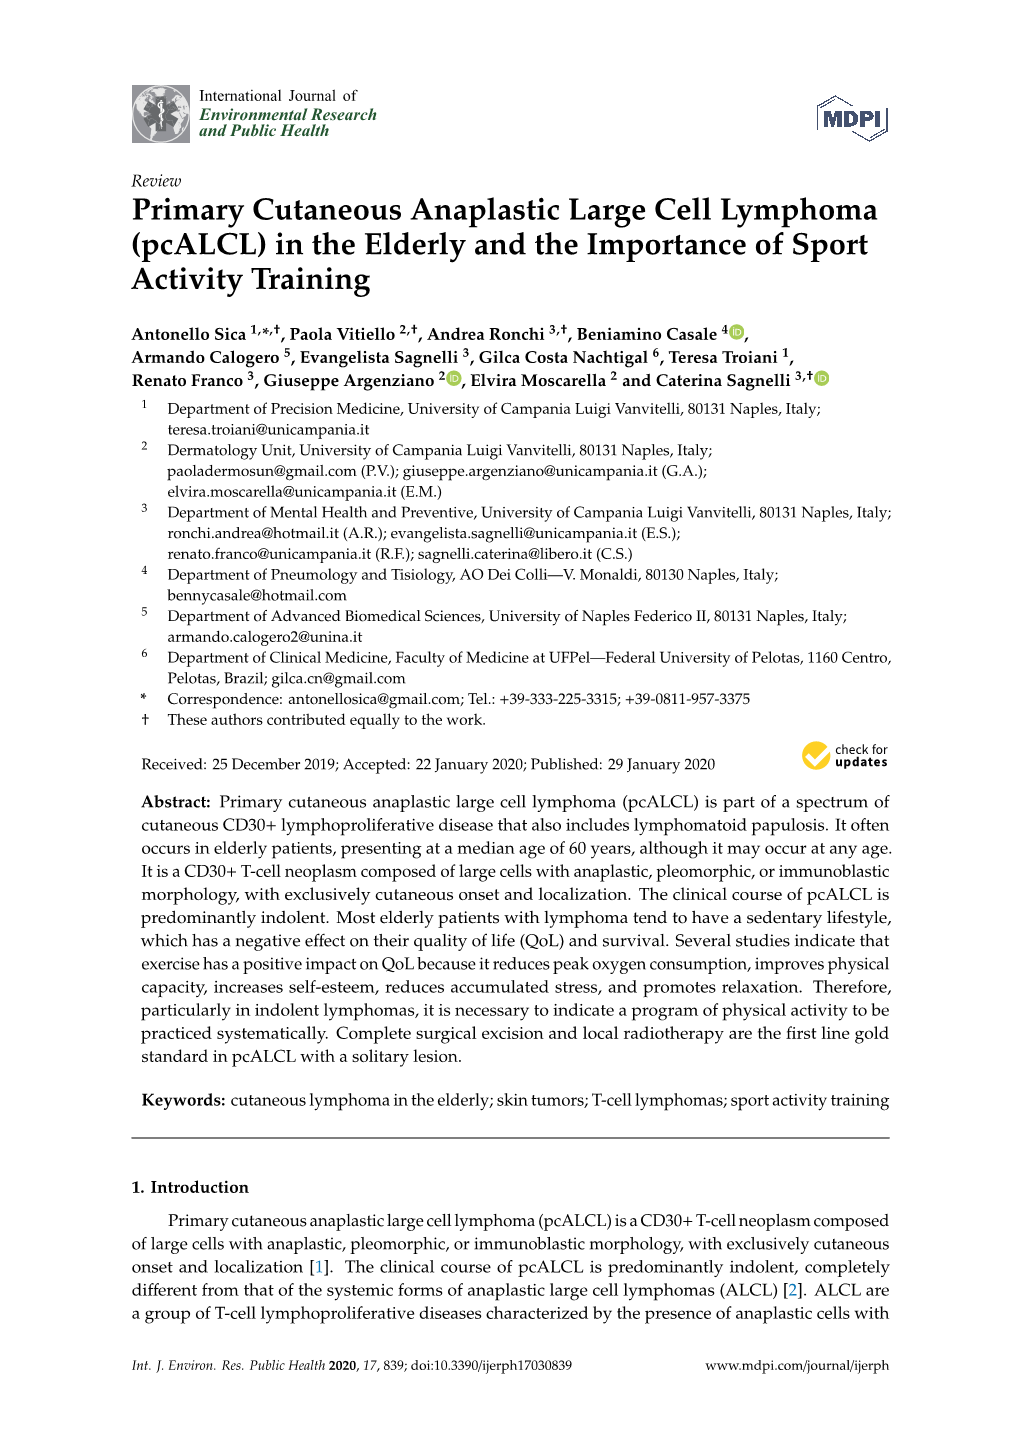 Primary Cutaneous Anaplastic Large Cell Lymphoma (Pcalcl) in the Elderly and the Importance of Sport Activity Training